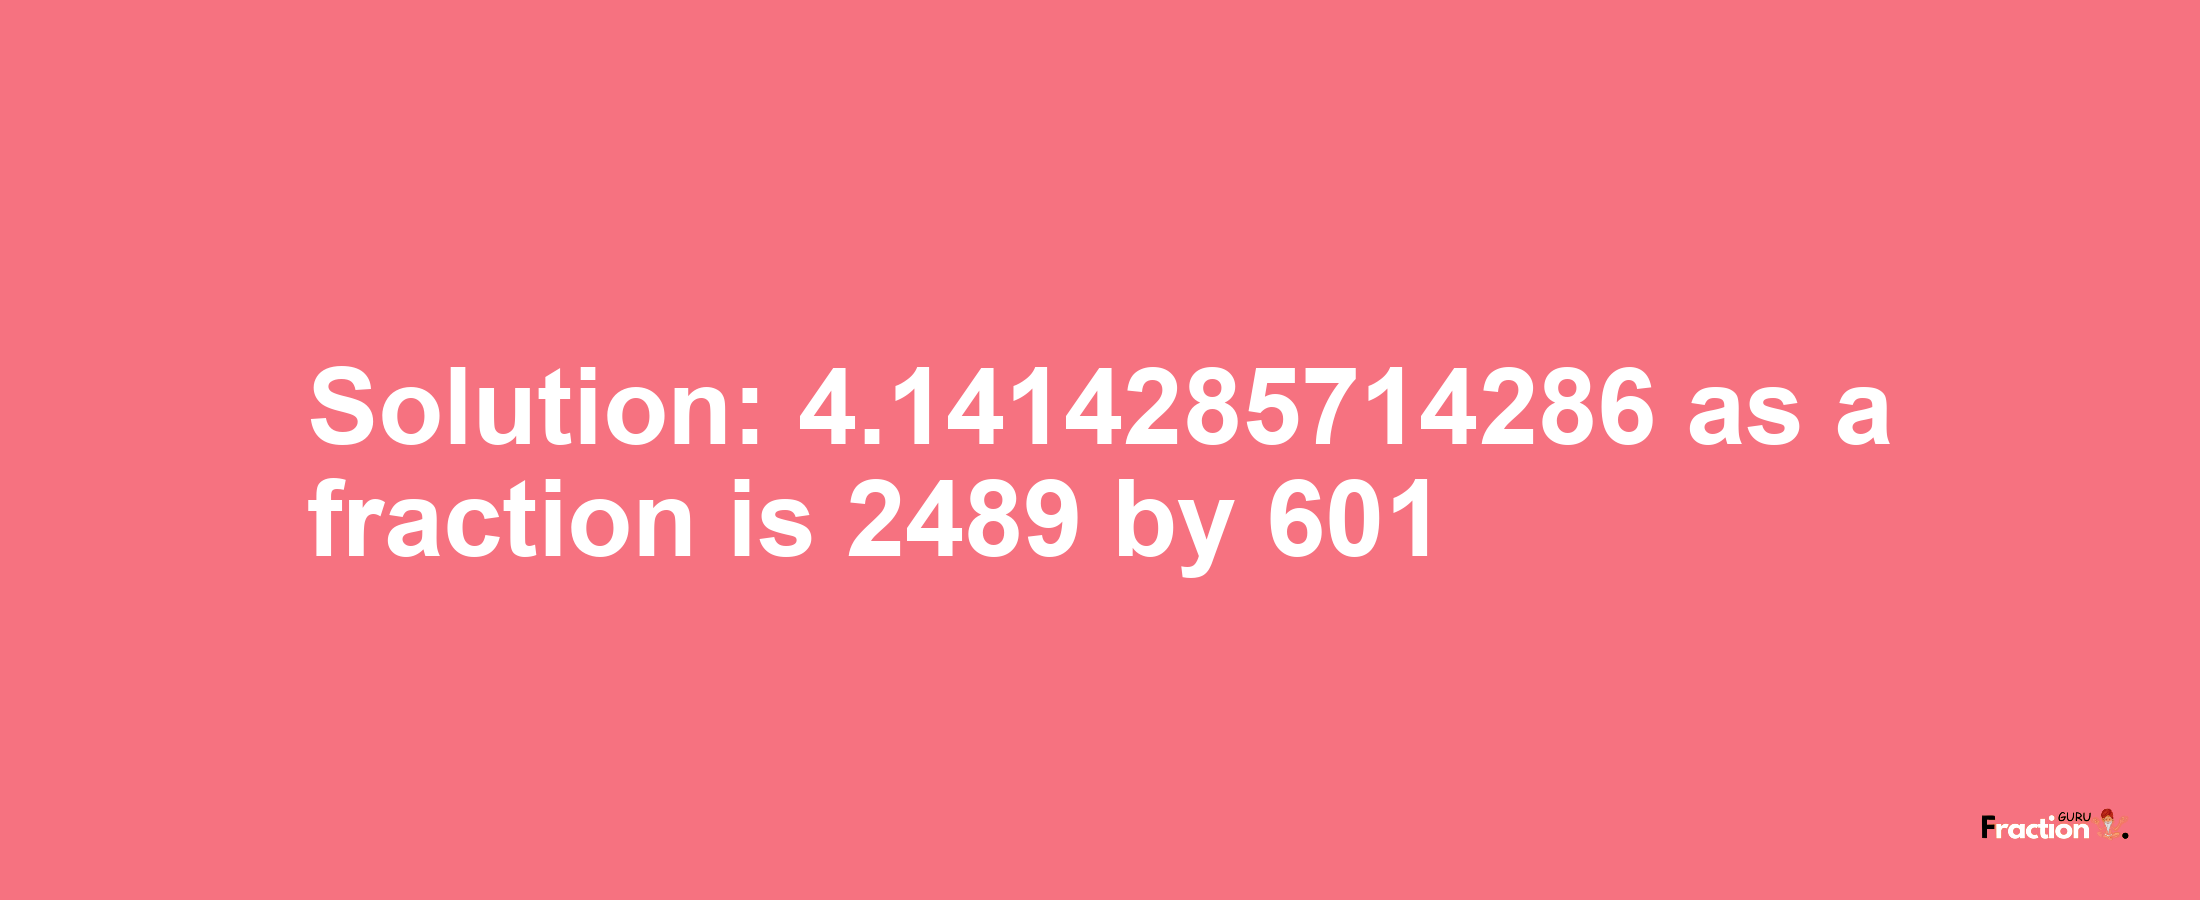 Solution:4.1414285714286 as a fraction is 2489/601